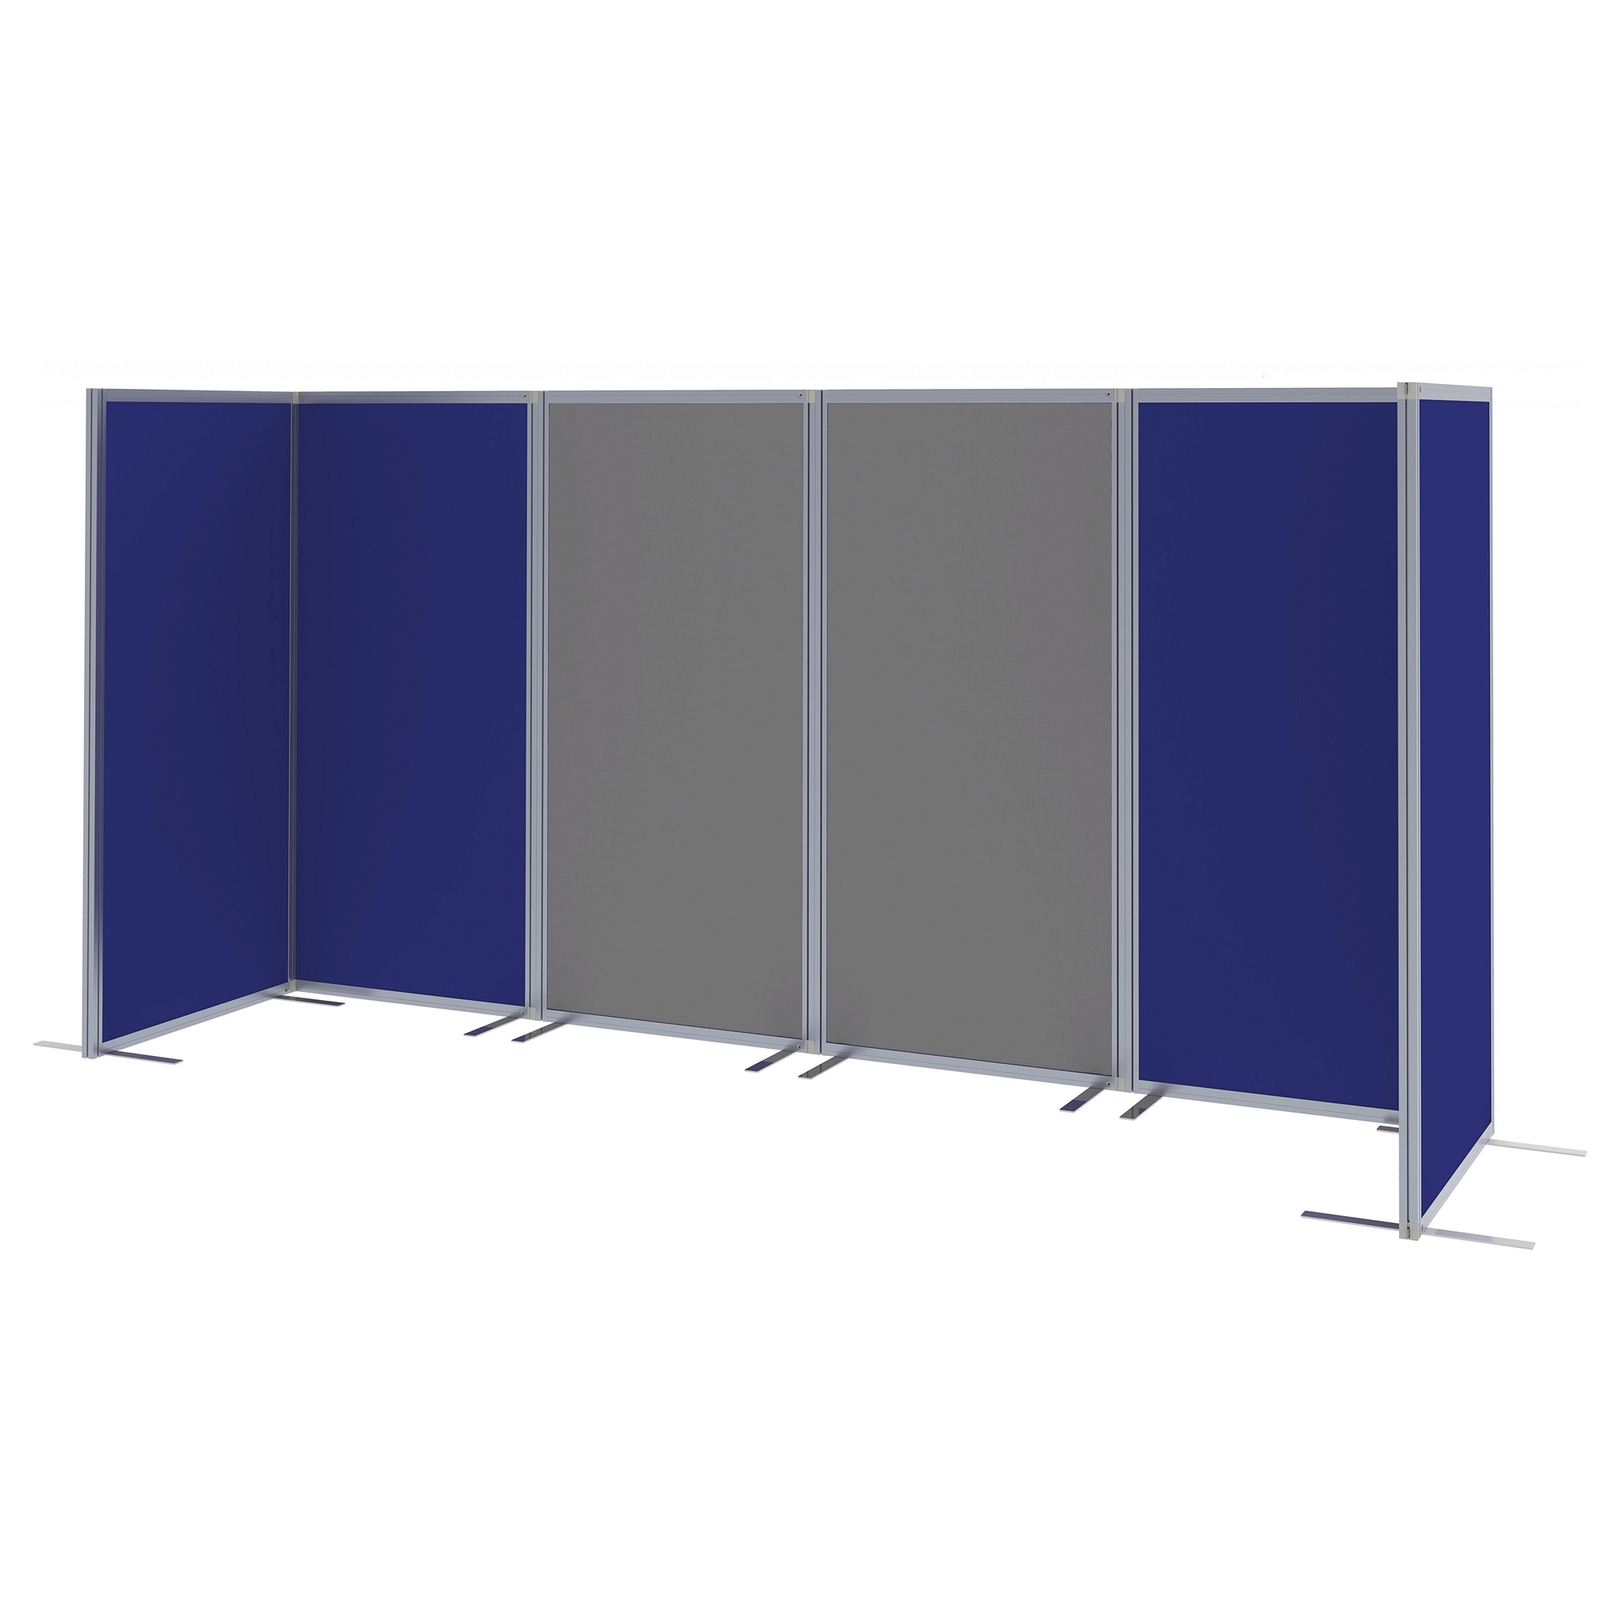 6 Panel Gallery Display System - 540x180